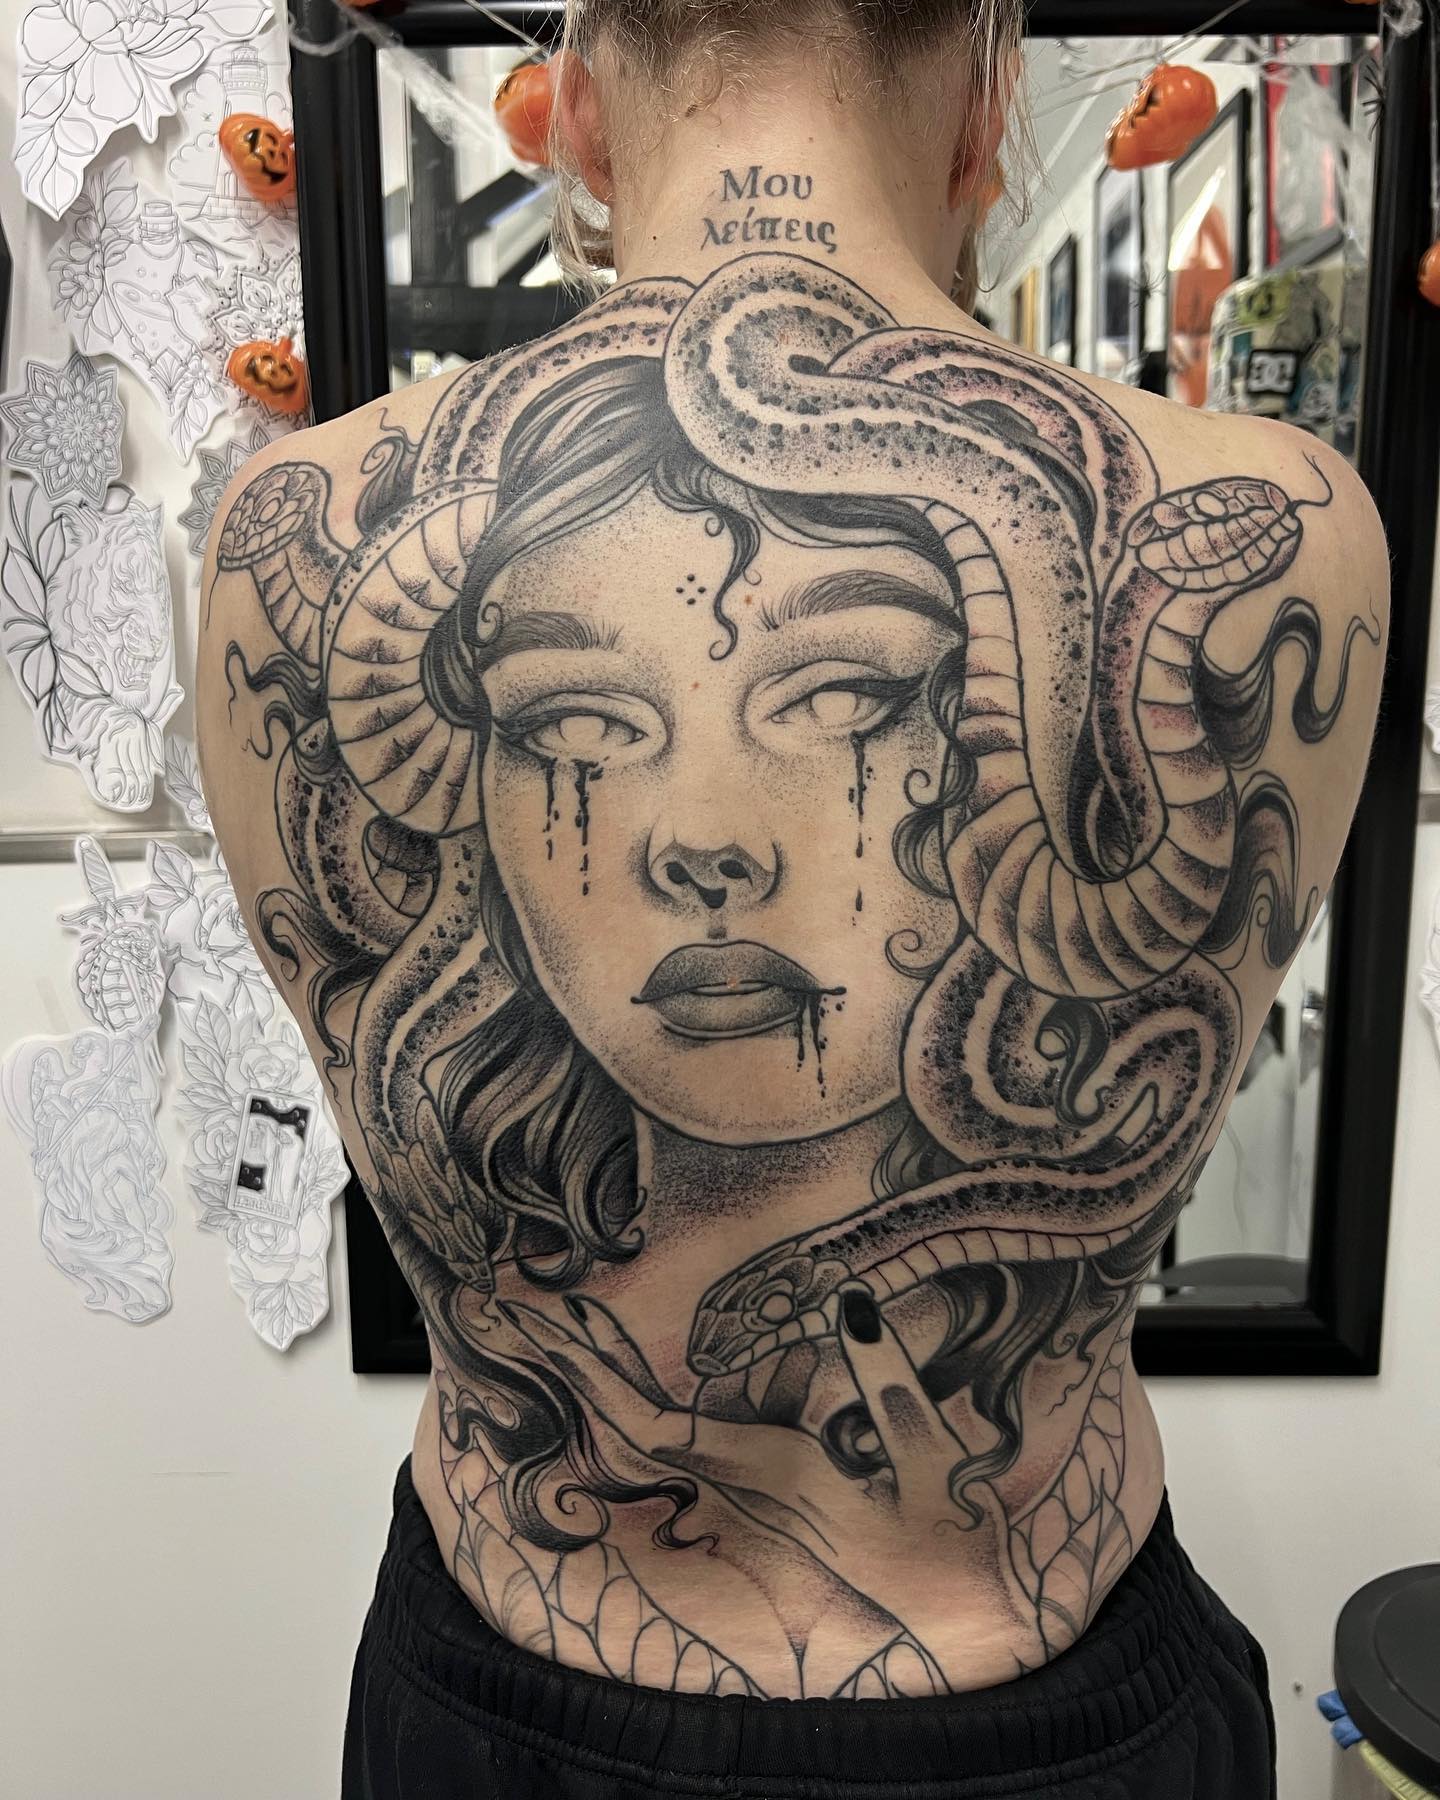 Wanna cover up your back with a Medusa tattoo? Then, you should get the one above since it offers a look that is hard to ignore. It seems like Medusa shows her beautiful side while showing her evil side at the same time.